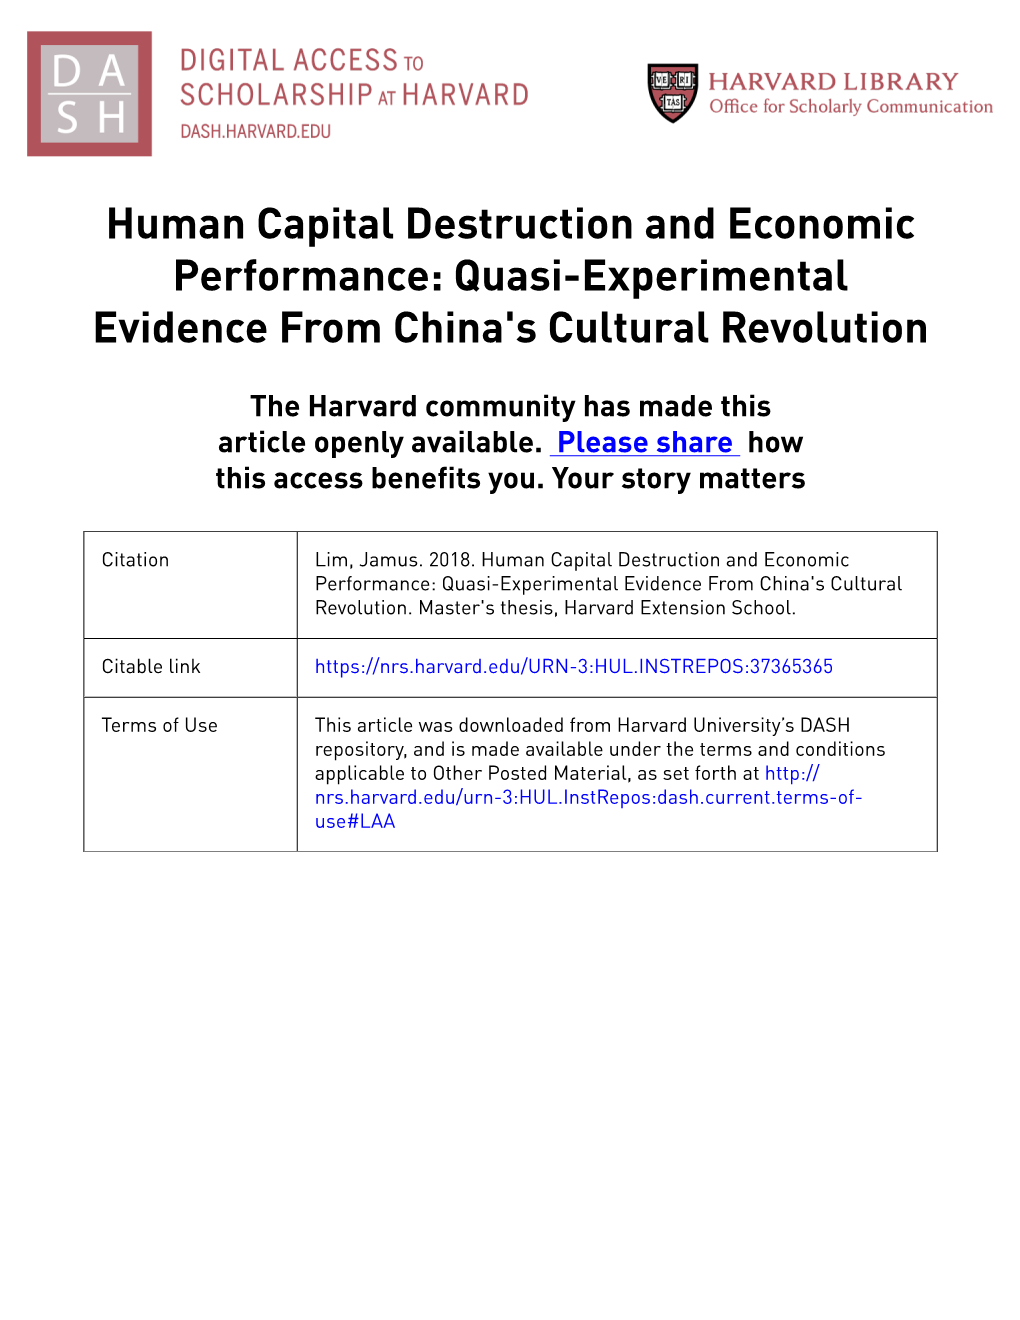 Human Capital Destruction and Economic Performance: Quasi-Experimental Evidence from China's Cultural Revolution